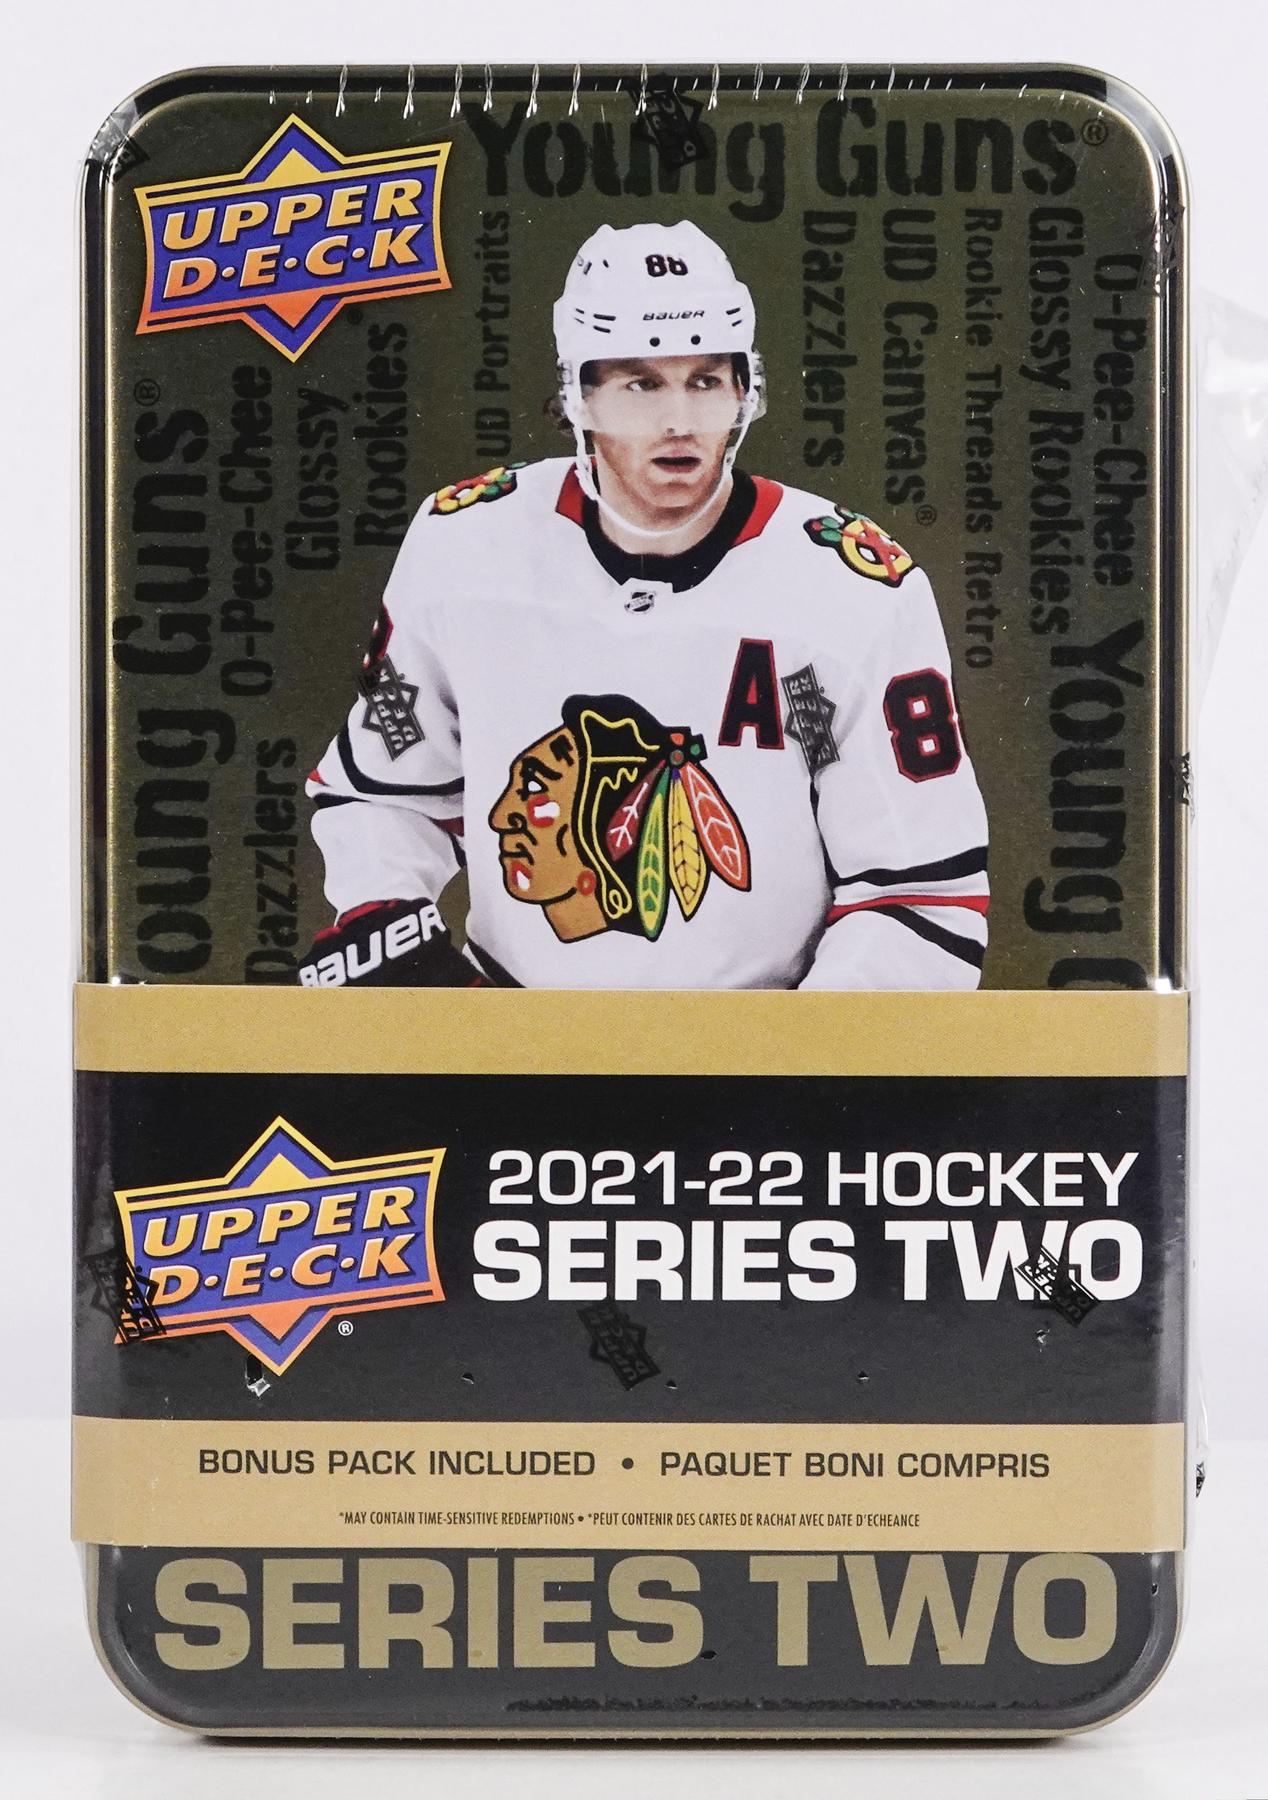 2017/18 Upper Deck Series 1 NHL Hockey Factory Sealed EXCLUSIVE Collectors  TIN with 12 Packs